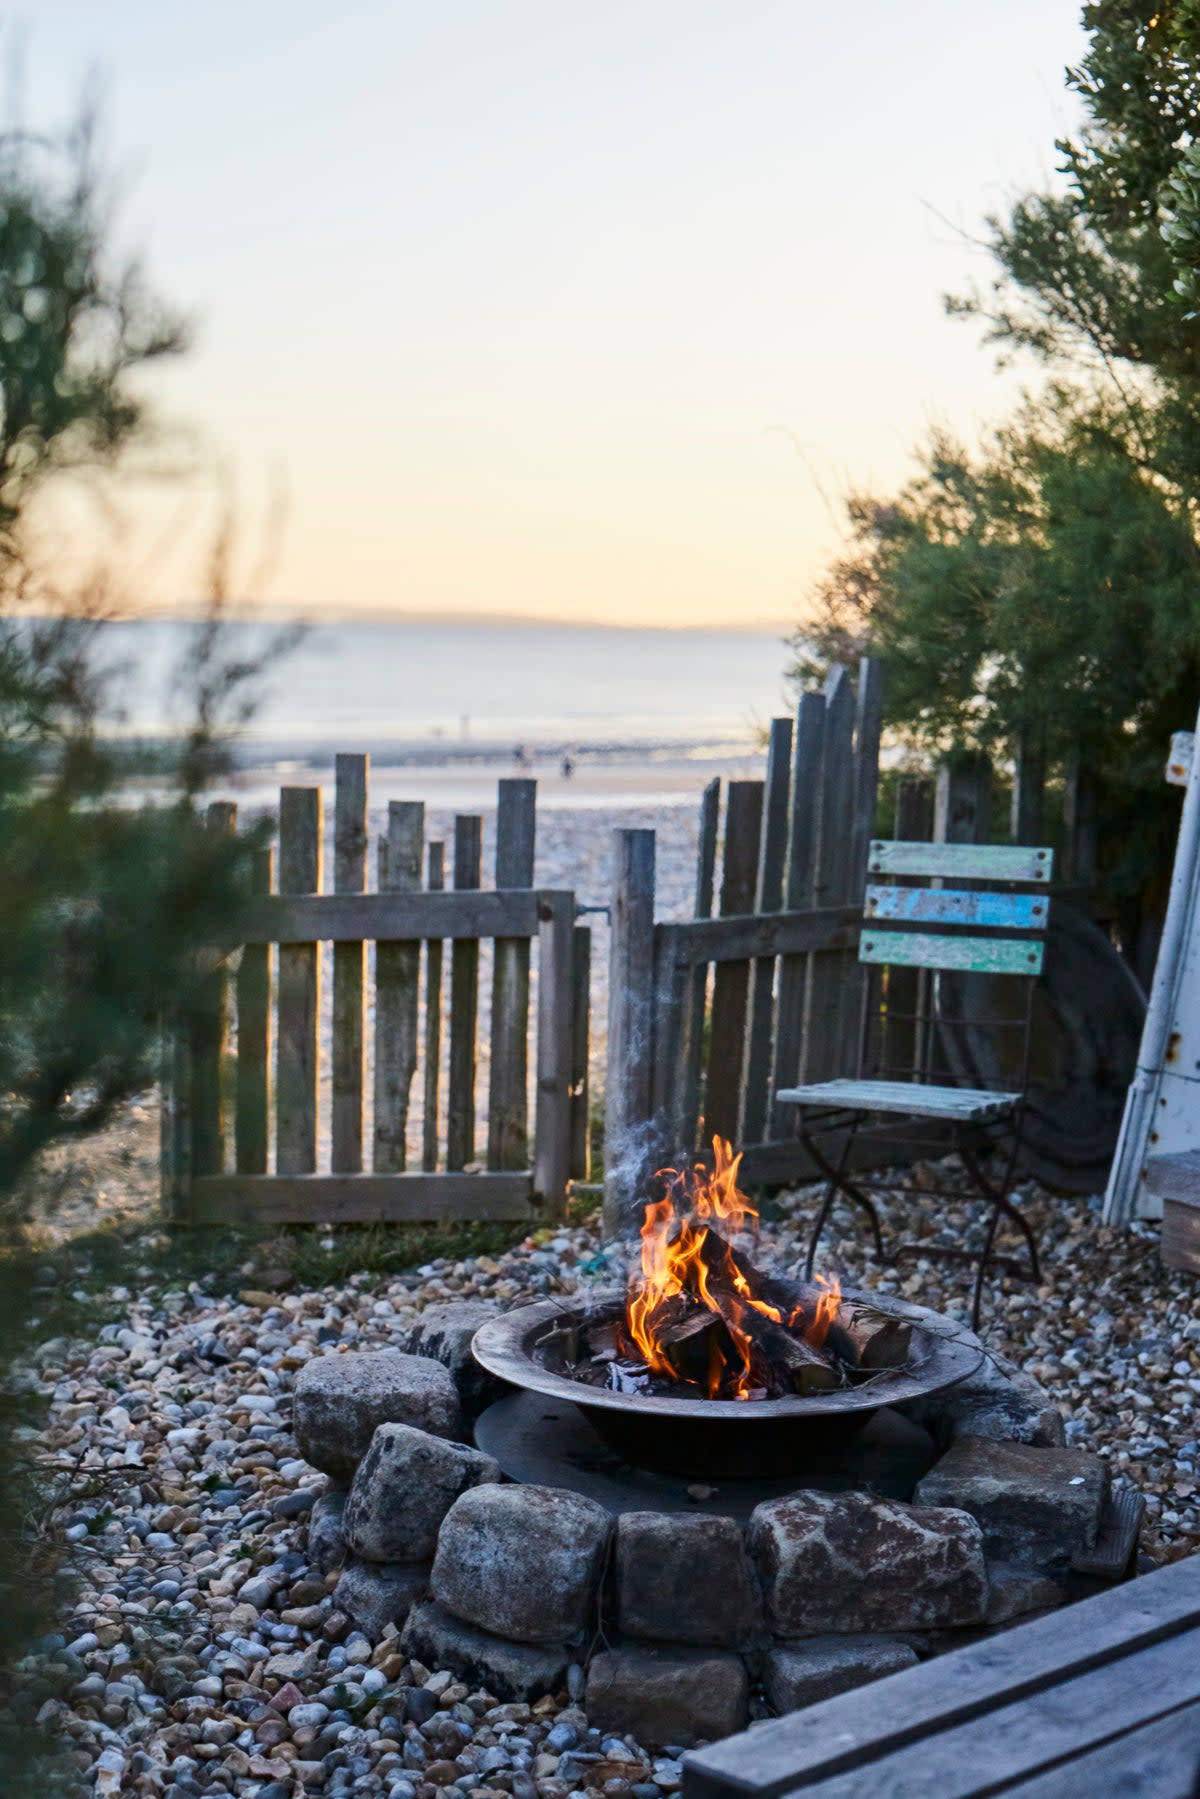 The house also has a fire pit and leads directly onto the beach (Beauty Point)